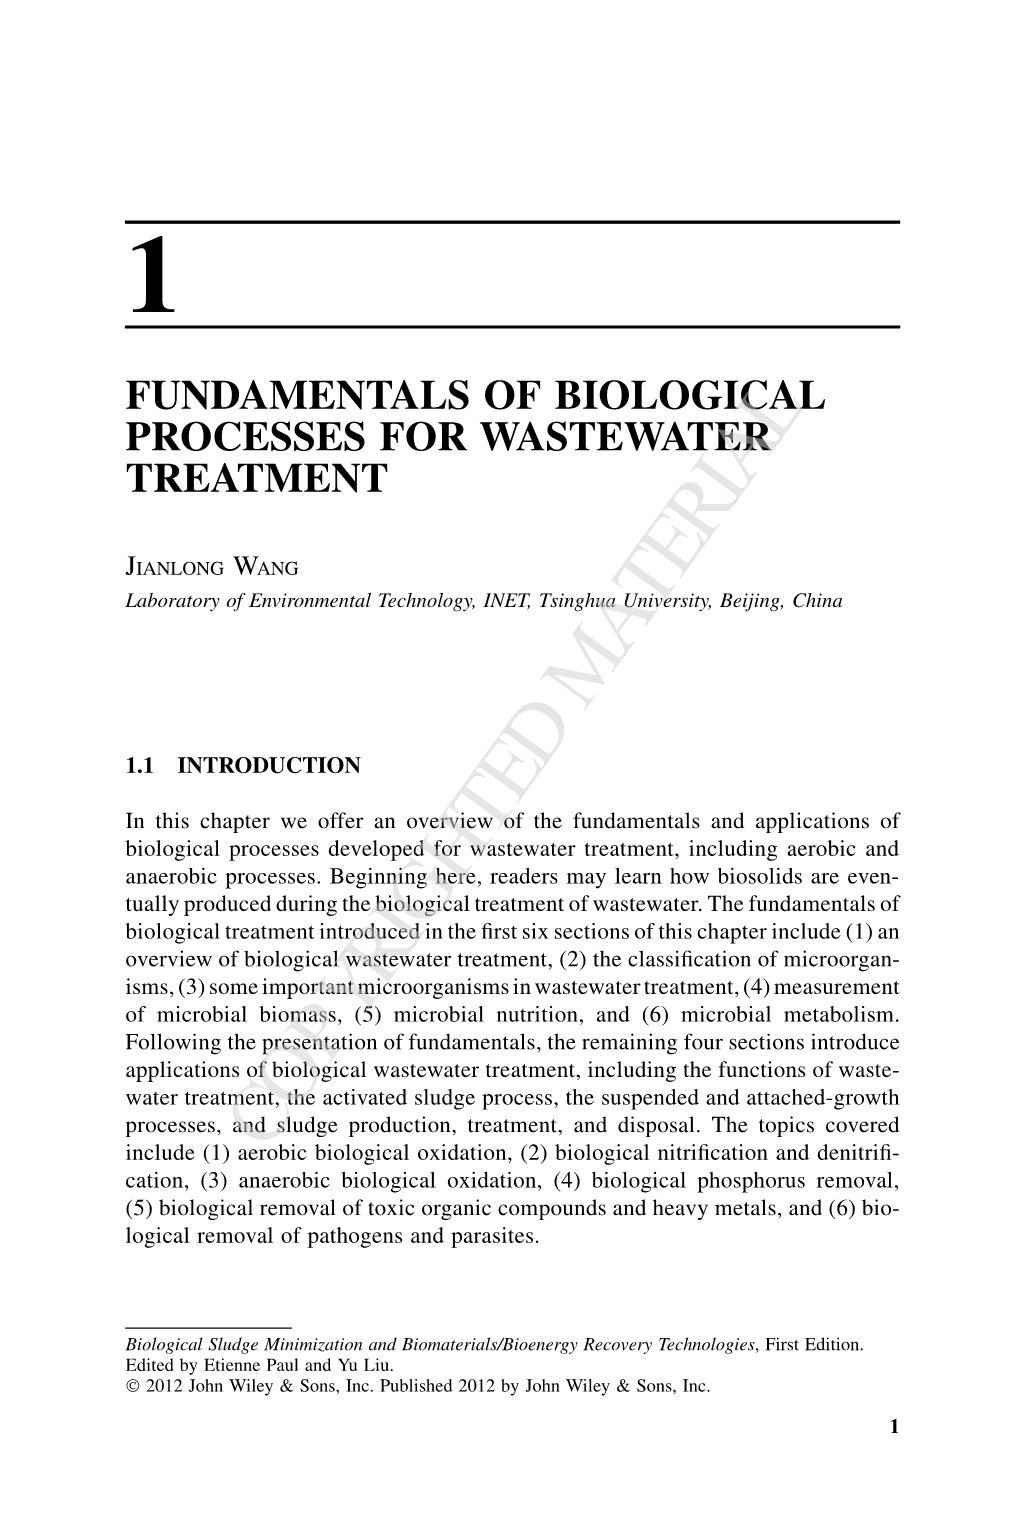 Fundamentals of Biological Processes for Wastewater Treatment